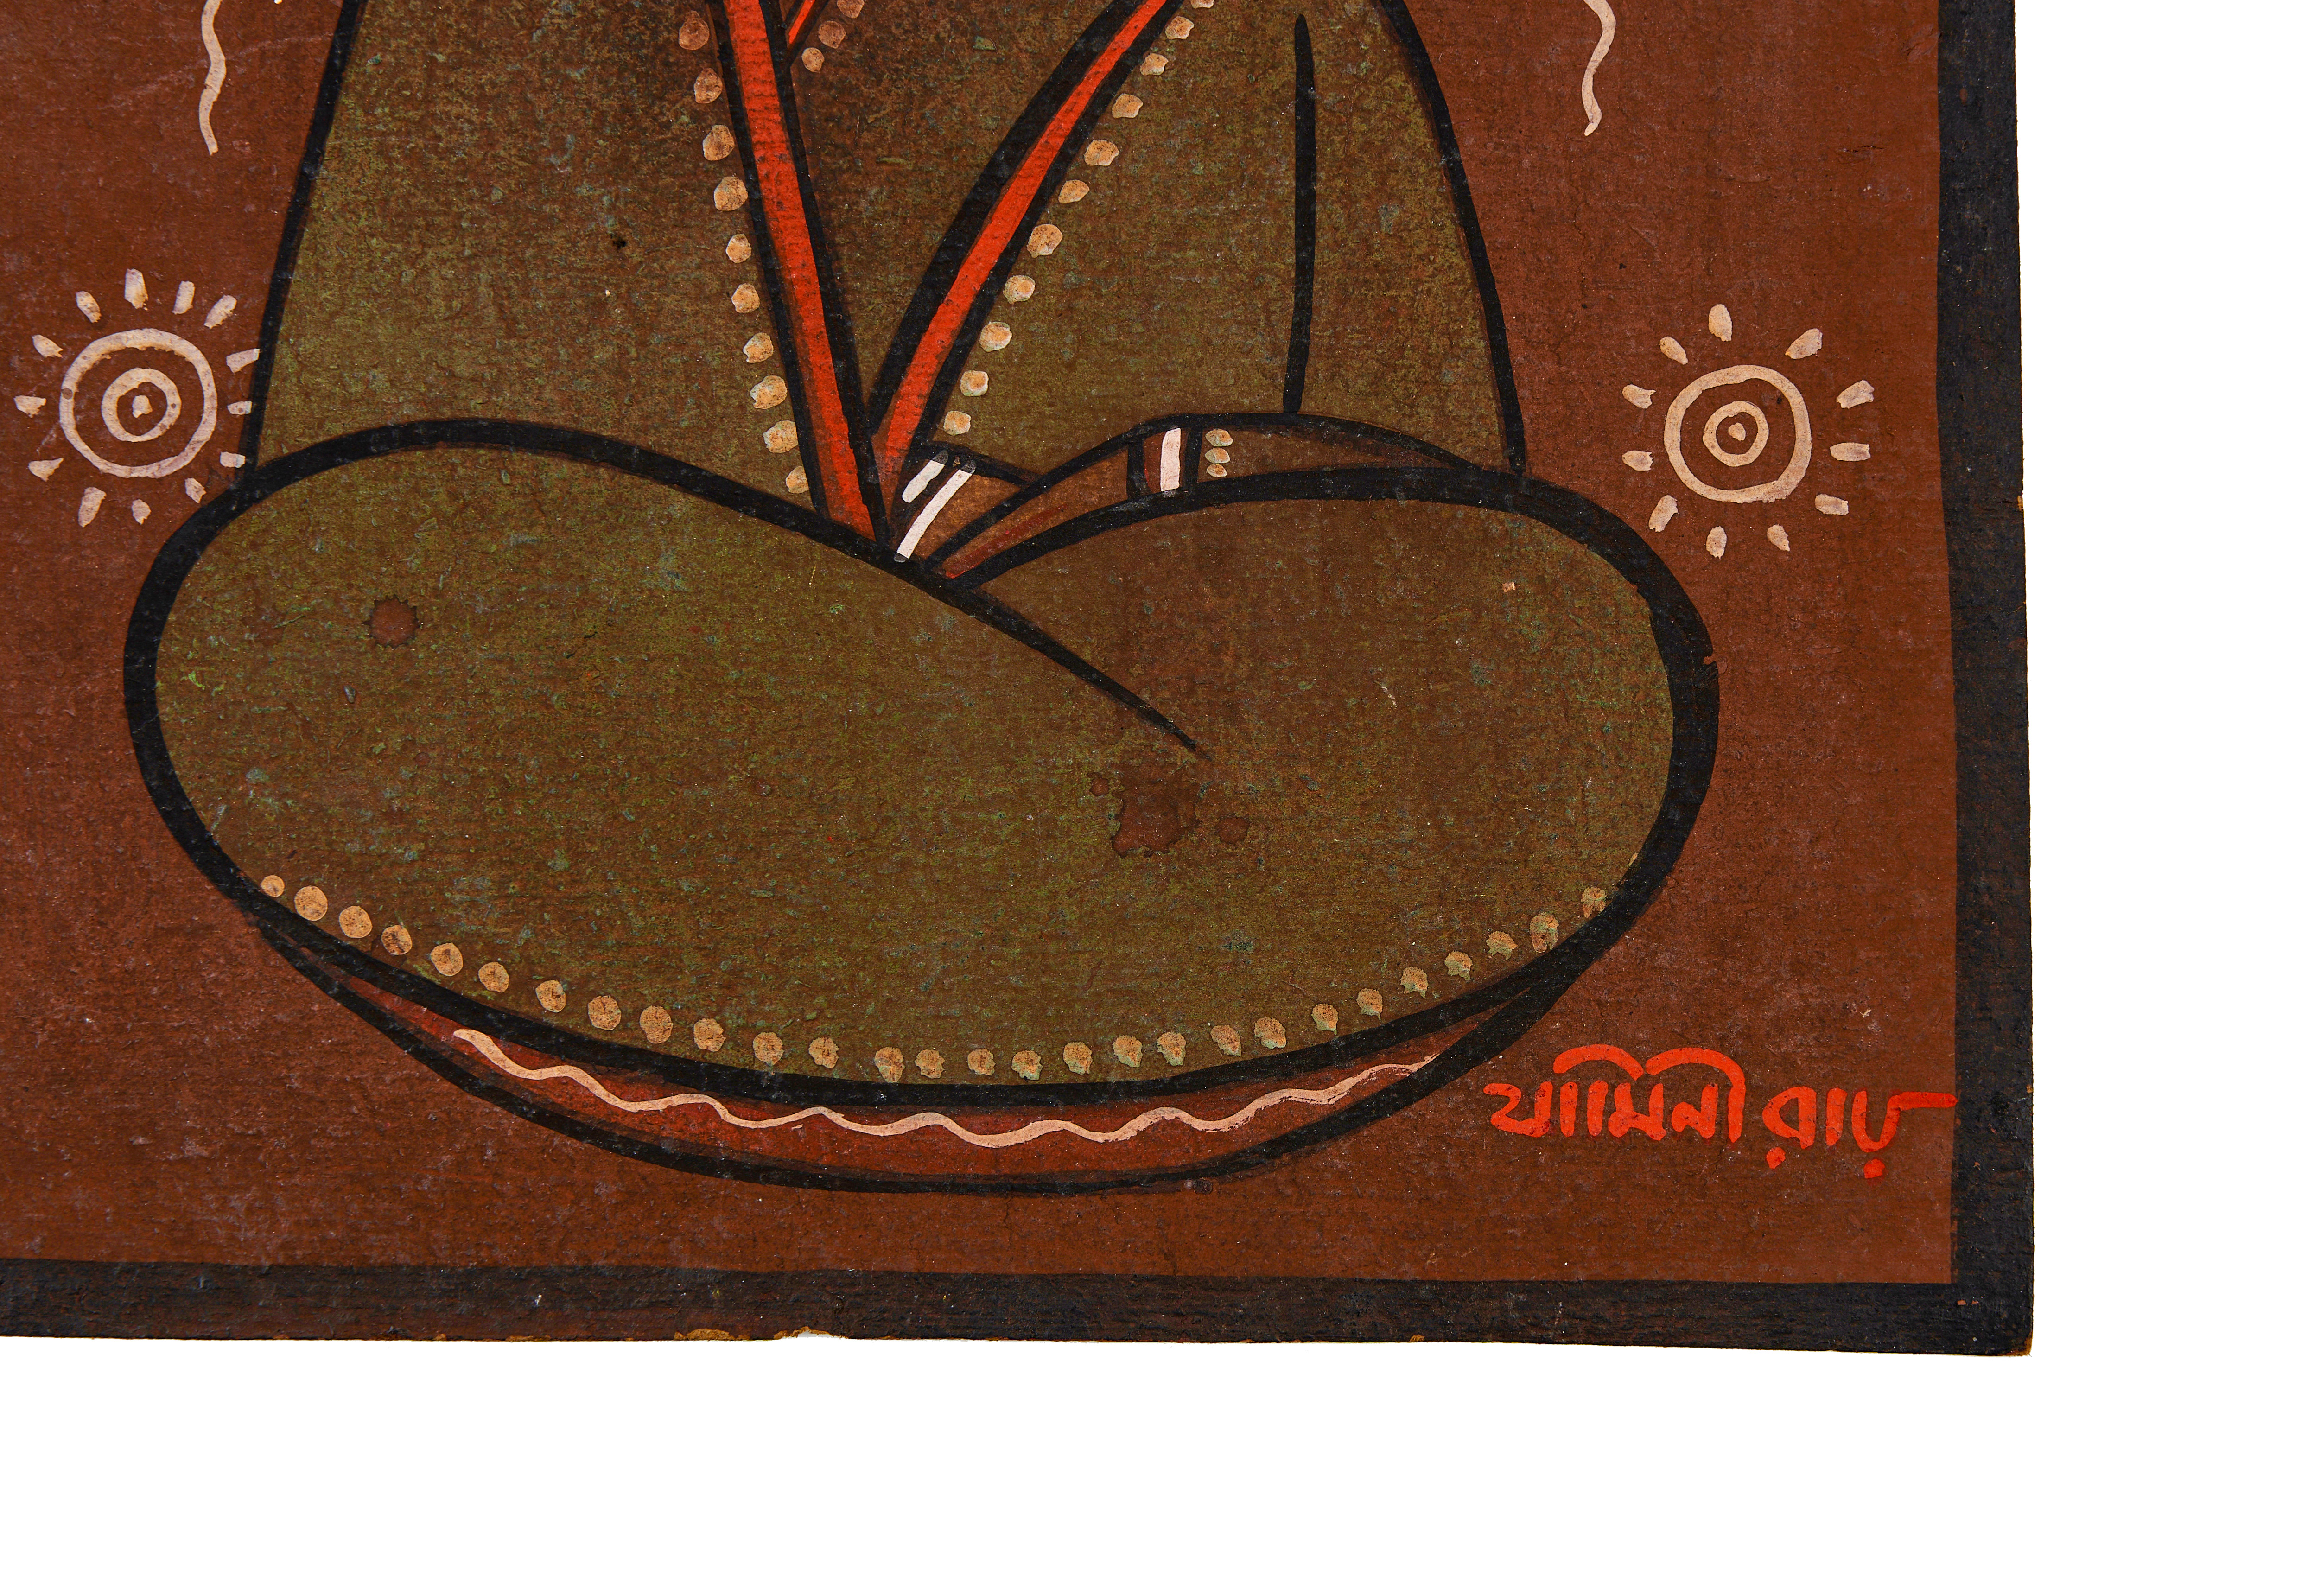 JAMINI ROY (1887-1972) "UNTILTED" - Image 2 of 2